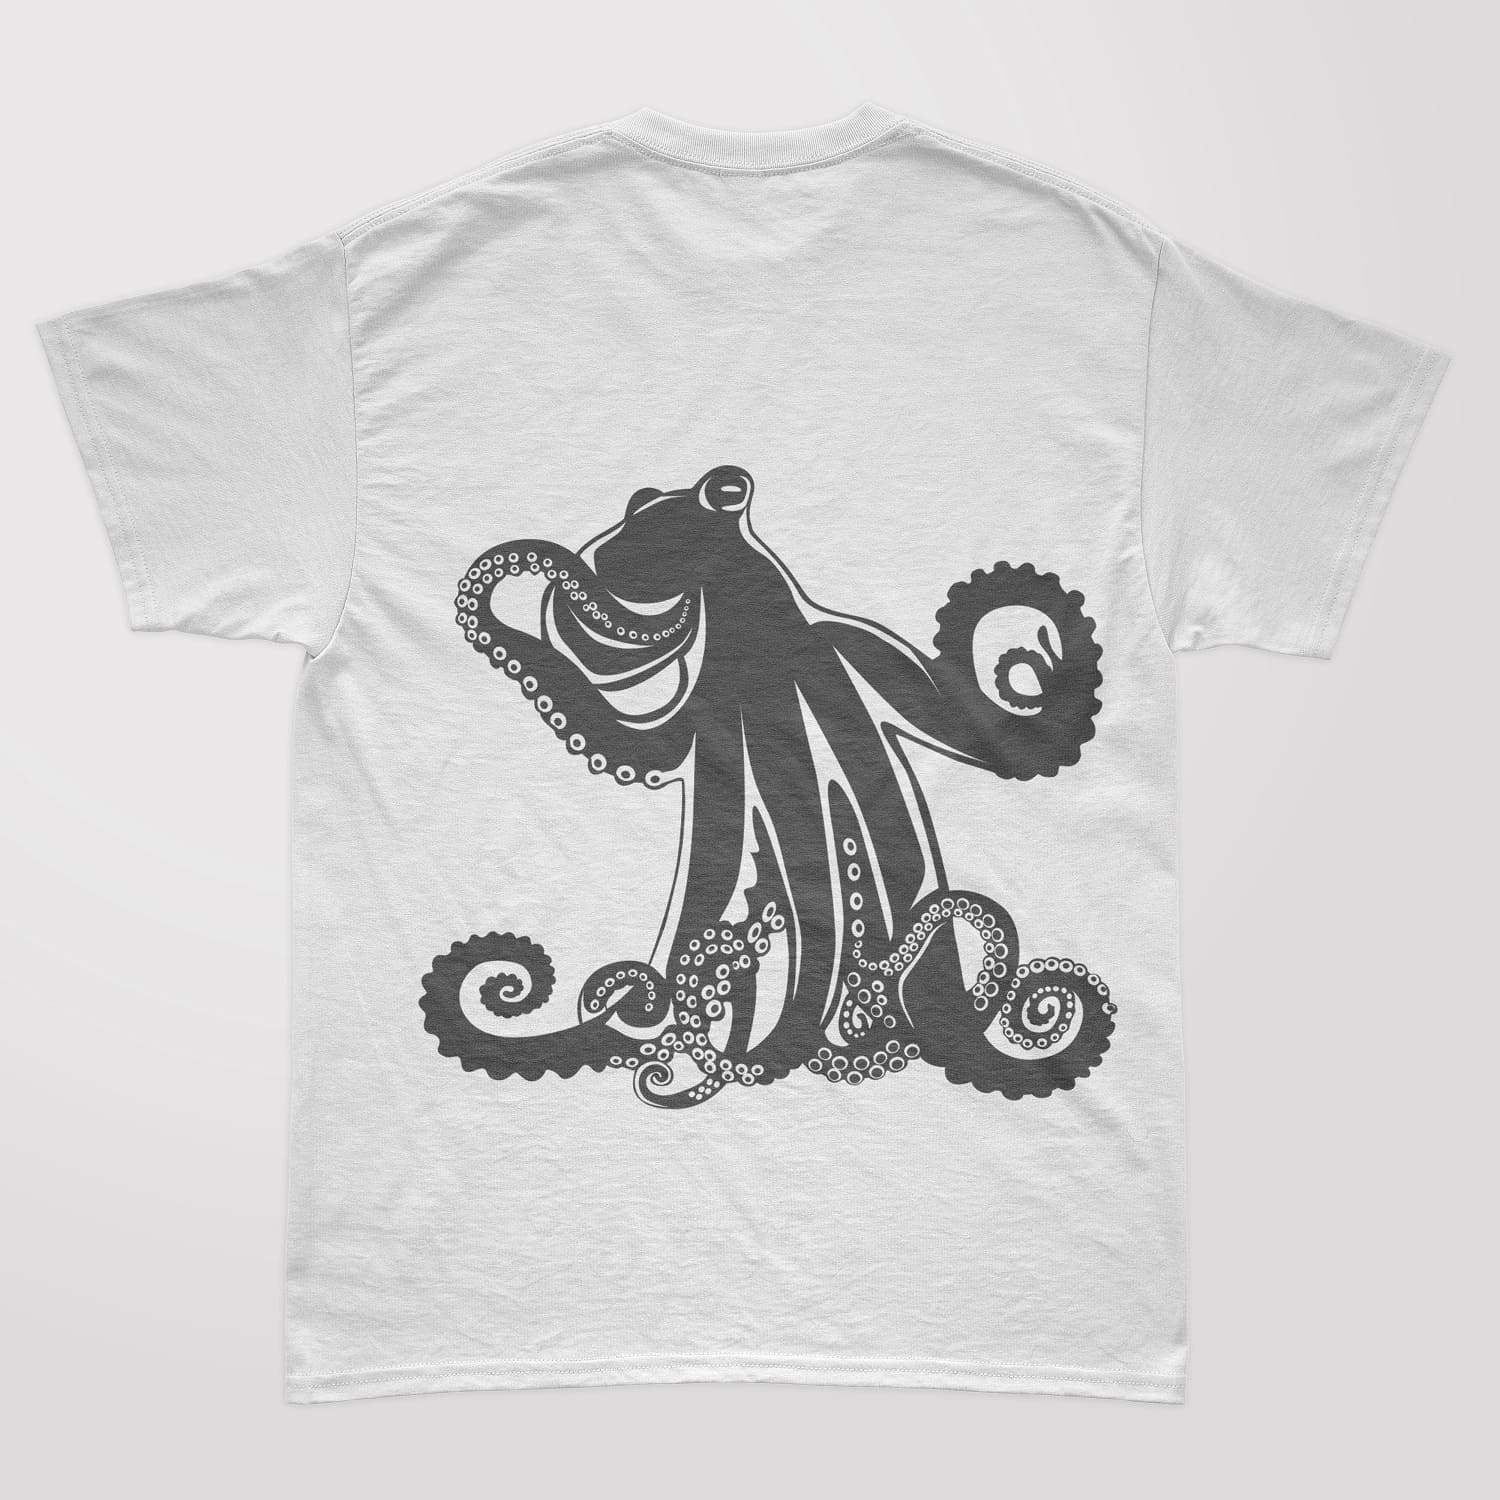 White T-shirt with a gray print of a standing octopus silhouette.